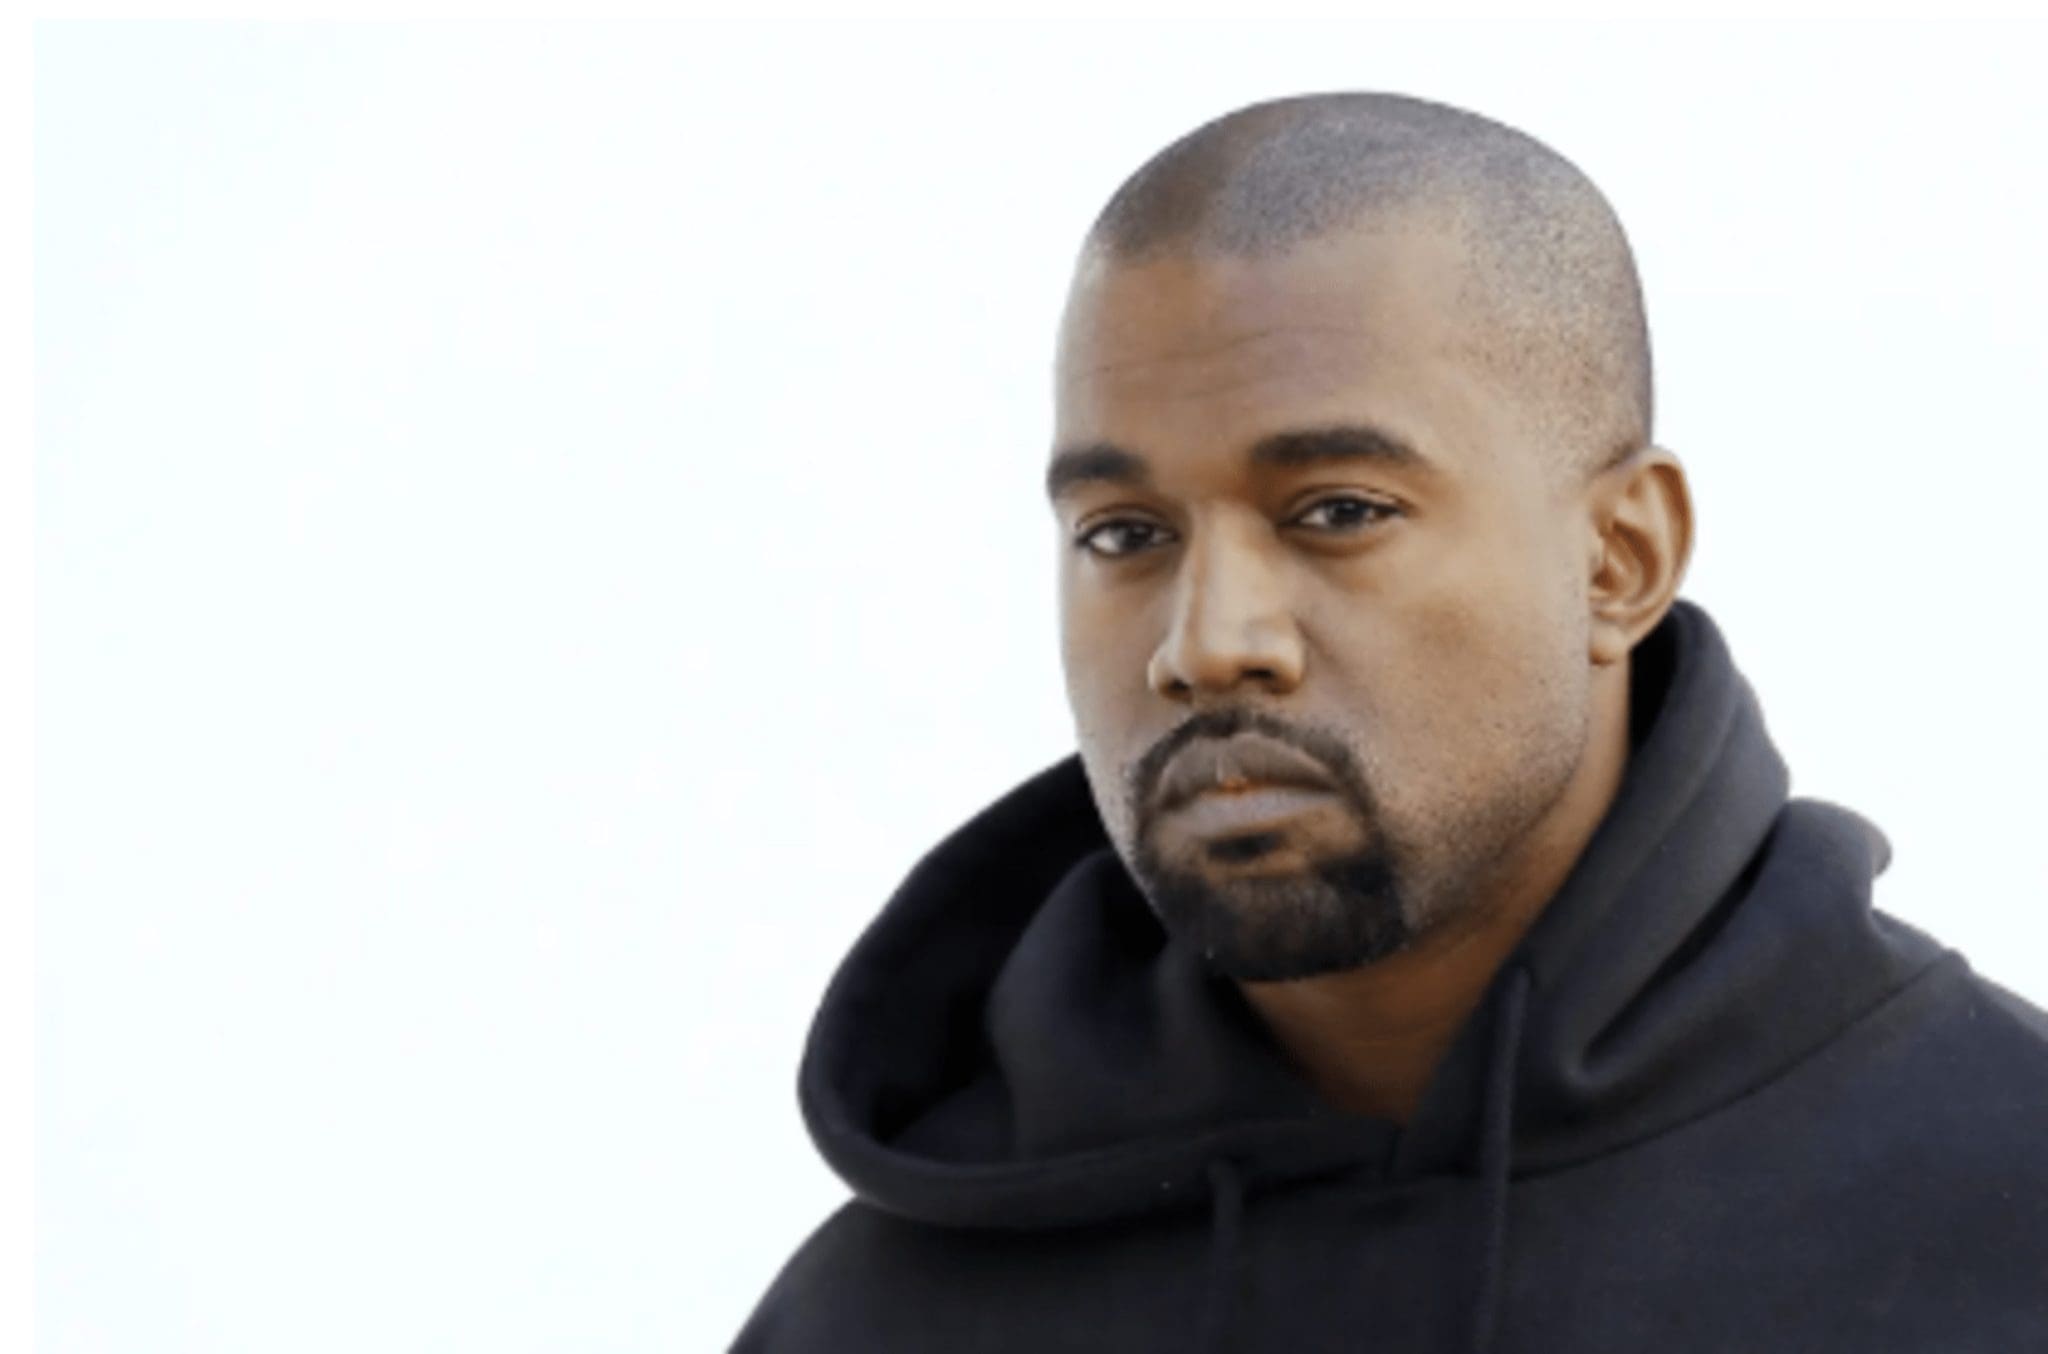 Instagram Banned Kanye West After He Posted Anti-Semitic Comments